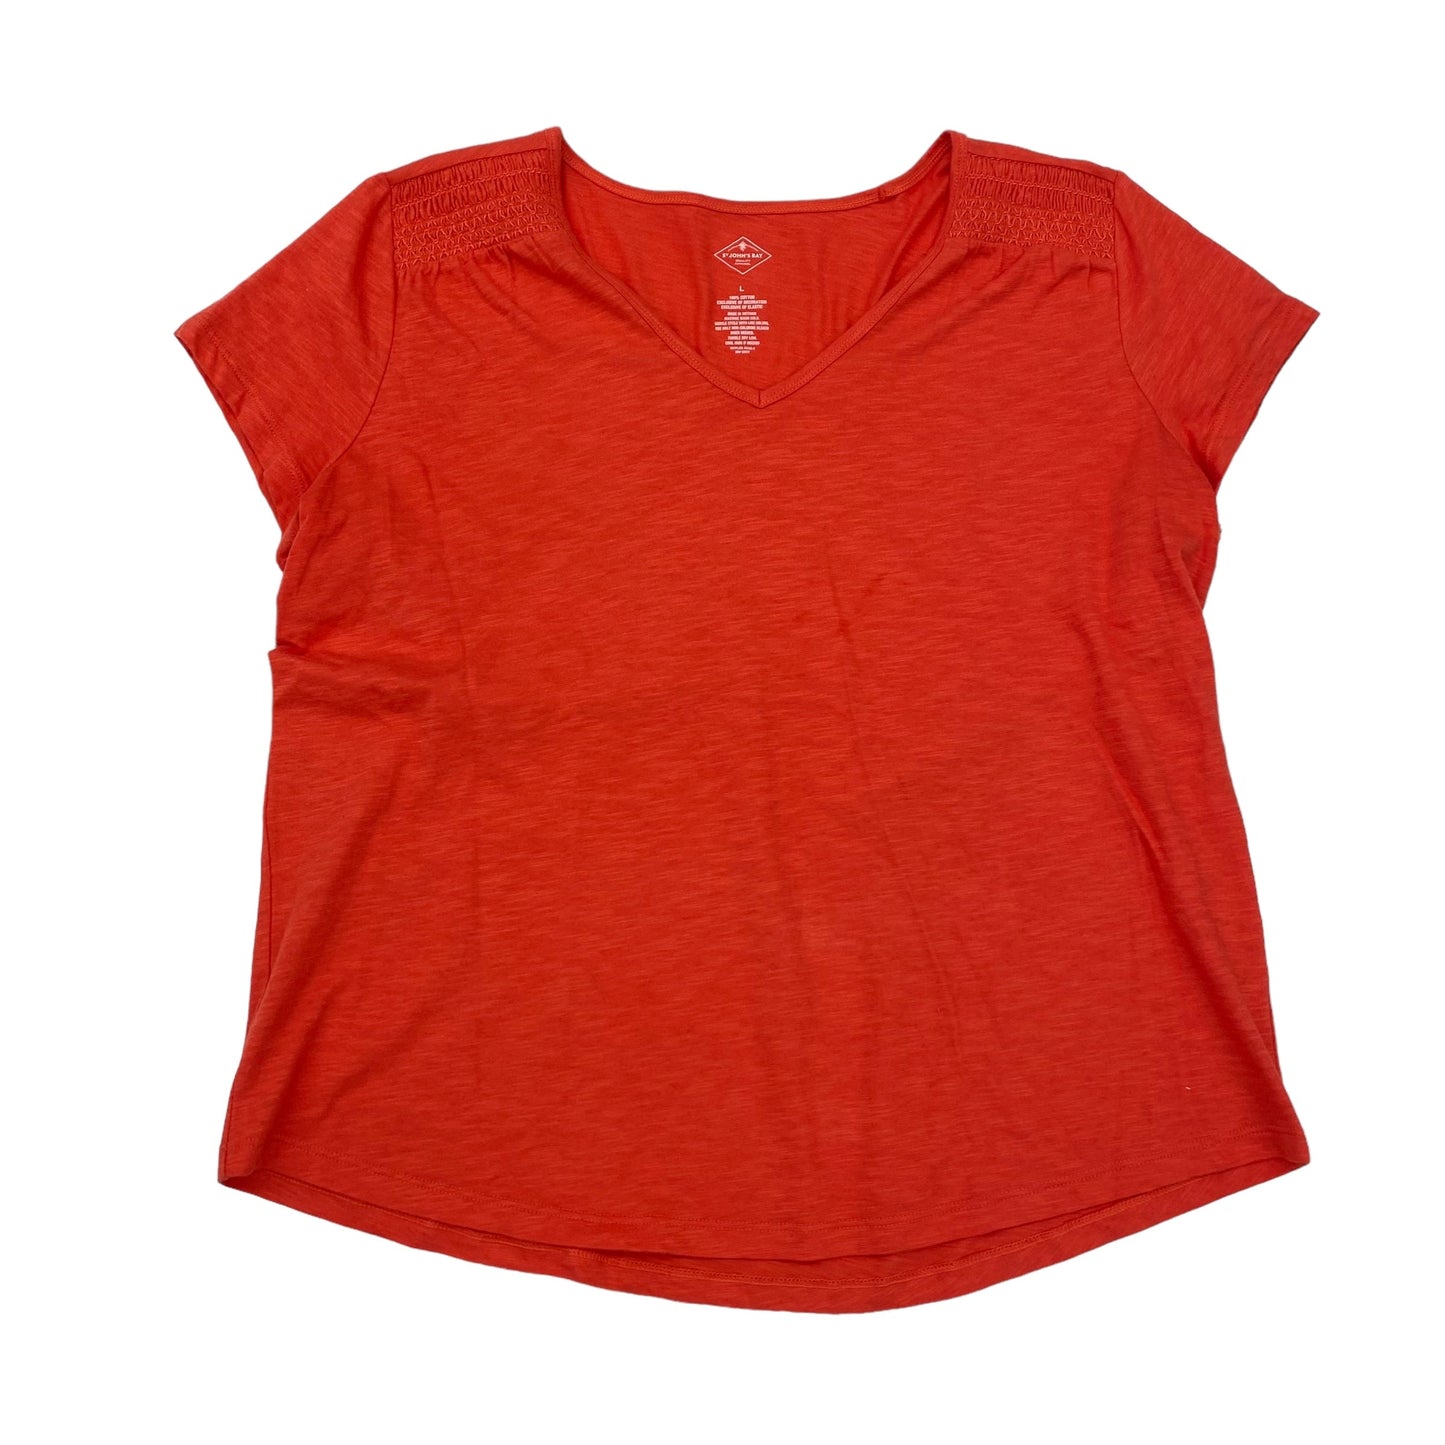 RED ST JOHNS BAY TOP SS, Size L